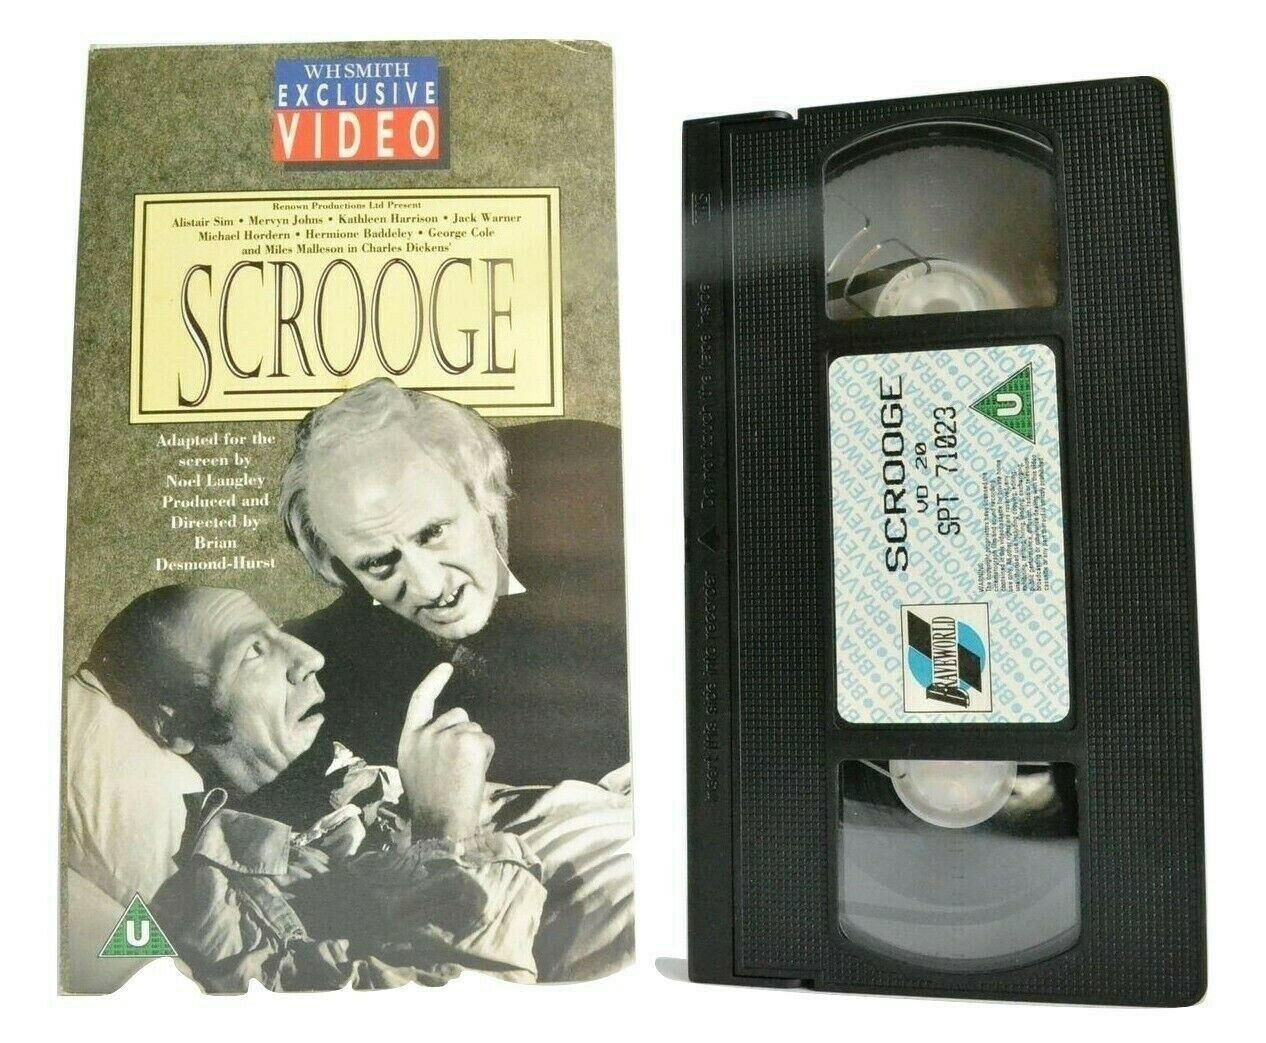 Scrooge [WH Smith Exclusive Video]: Christmas Tale [Charles Dickens] - Pal VHS-